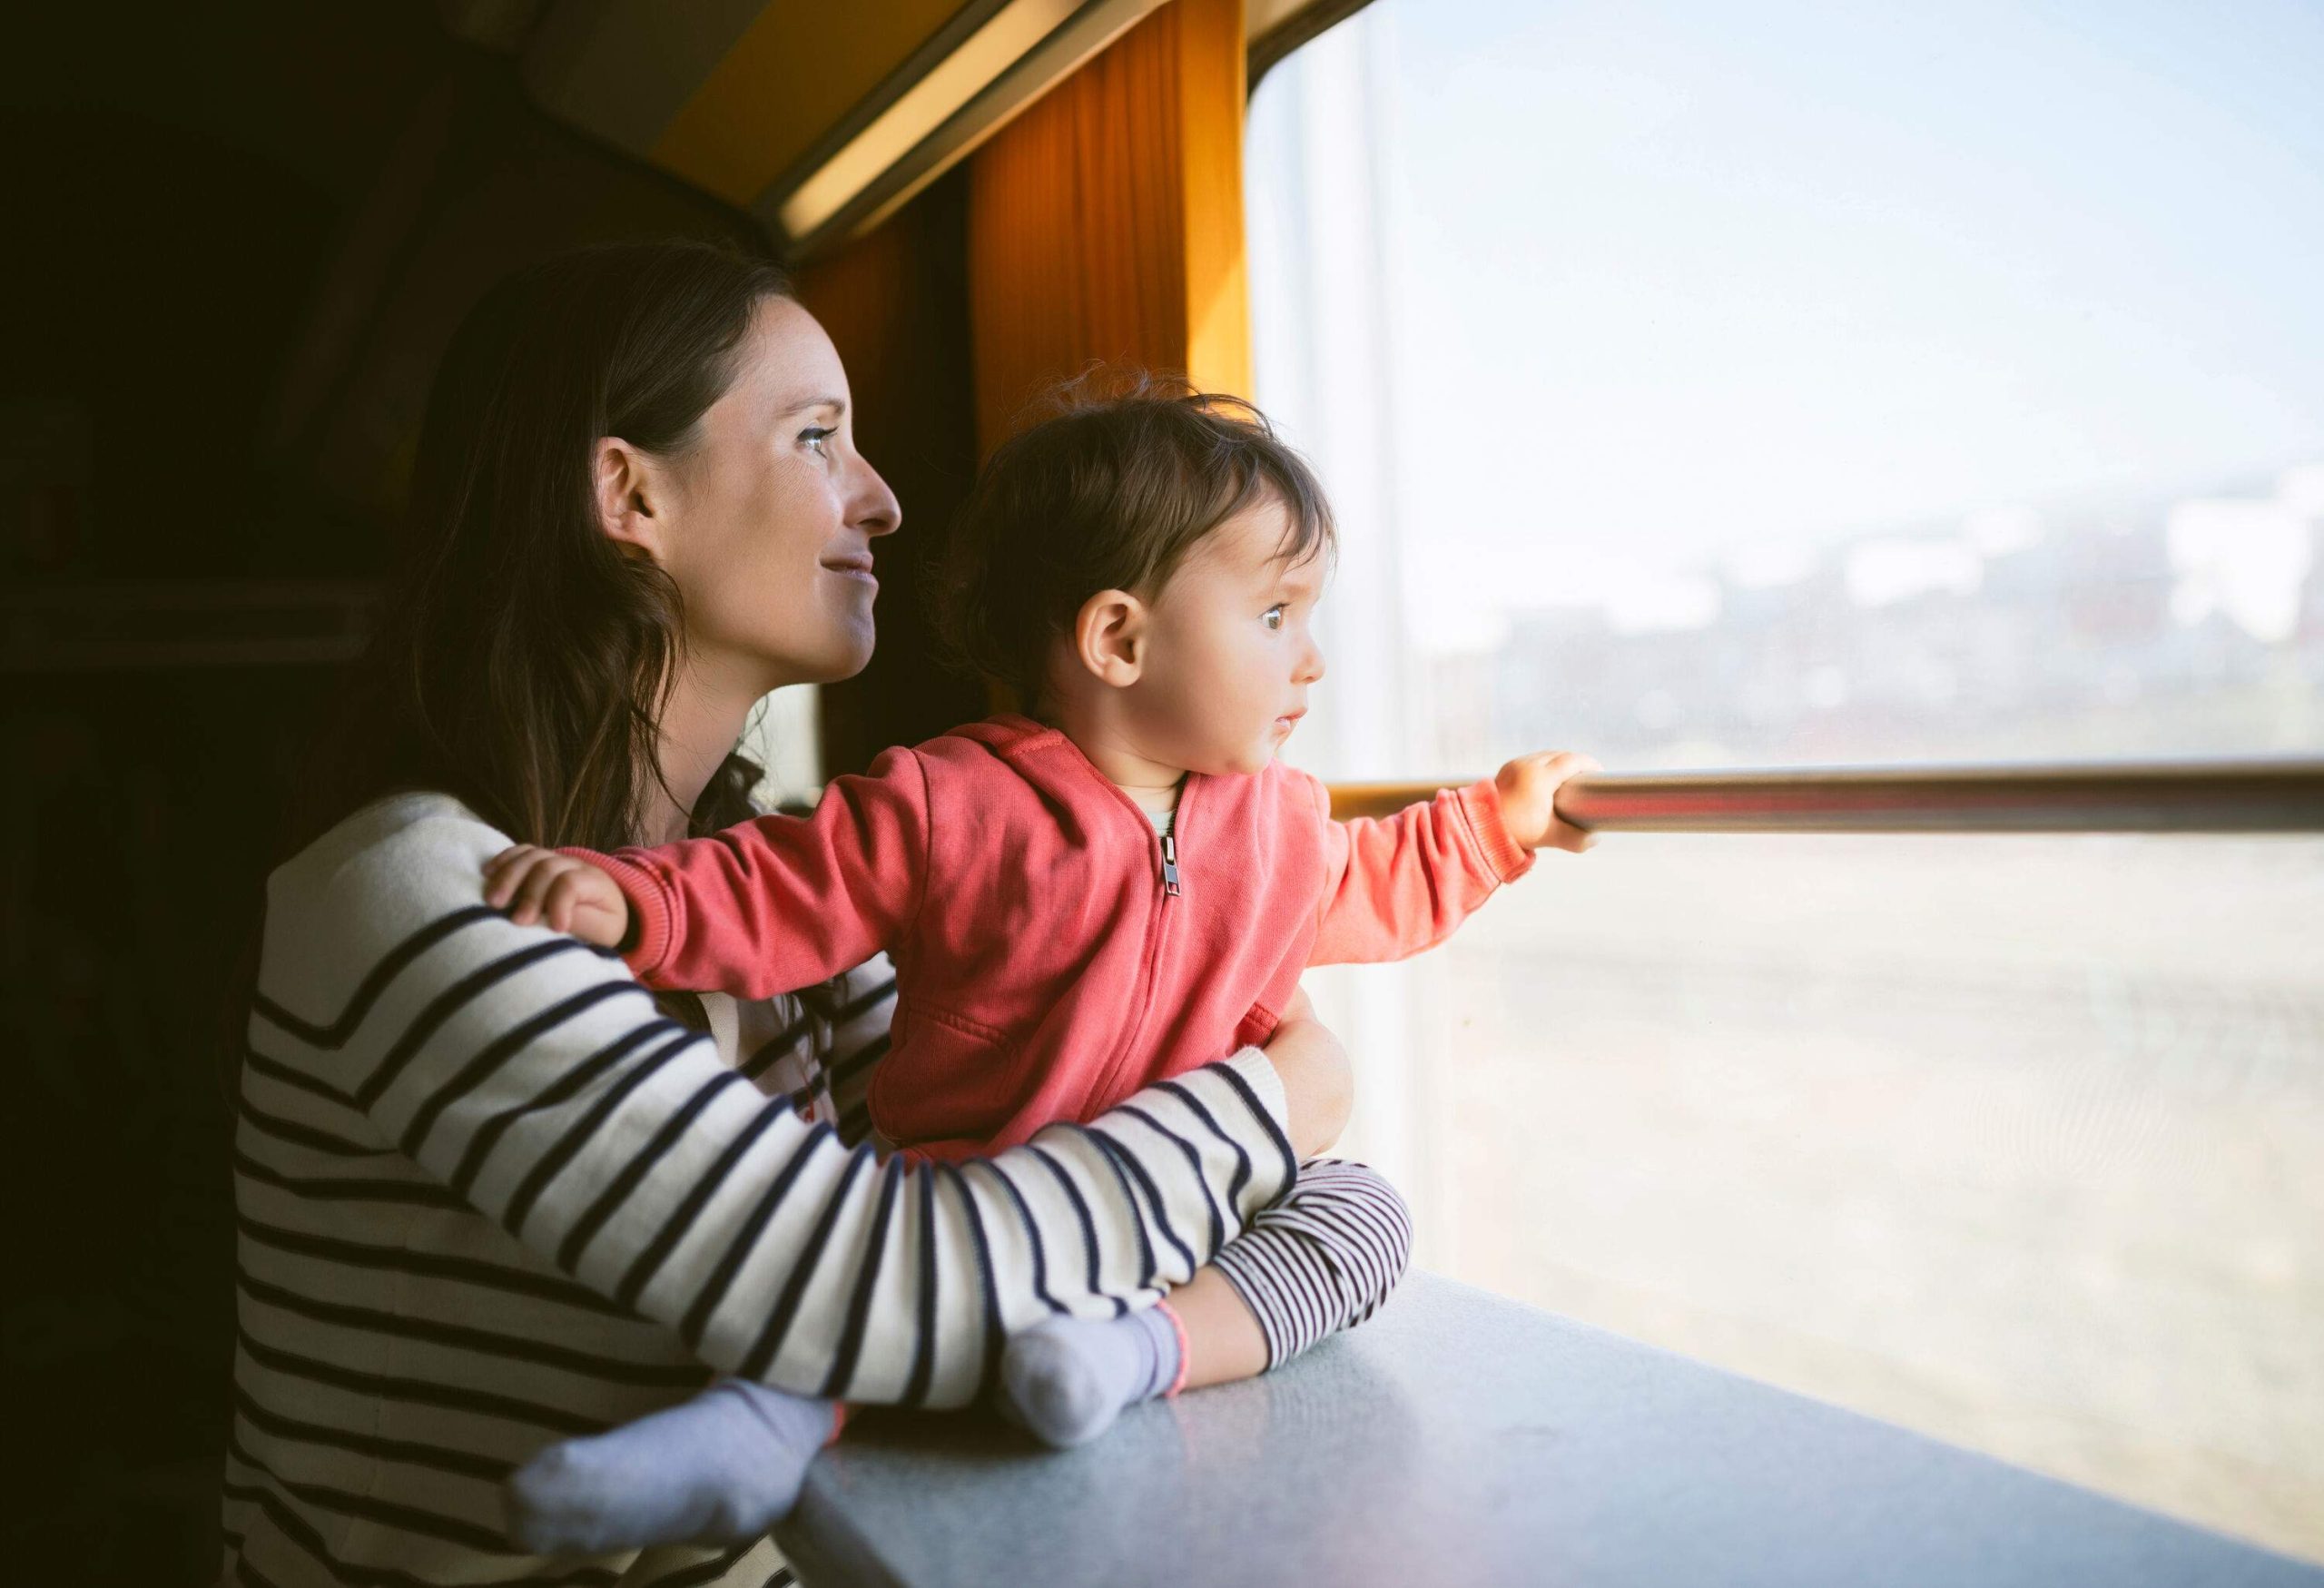 A mother in a striped sweater hugs a baby as they both look out the train's window.